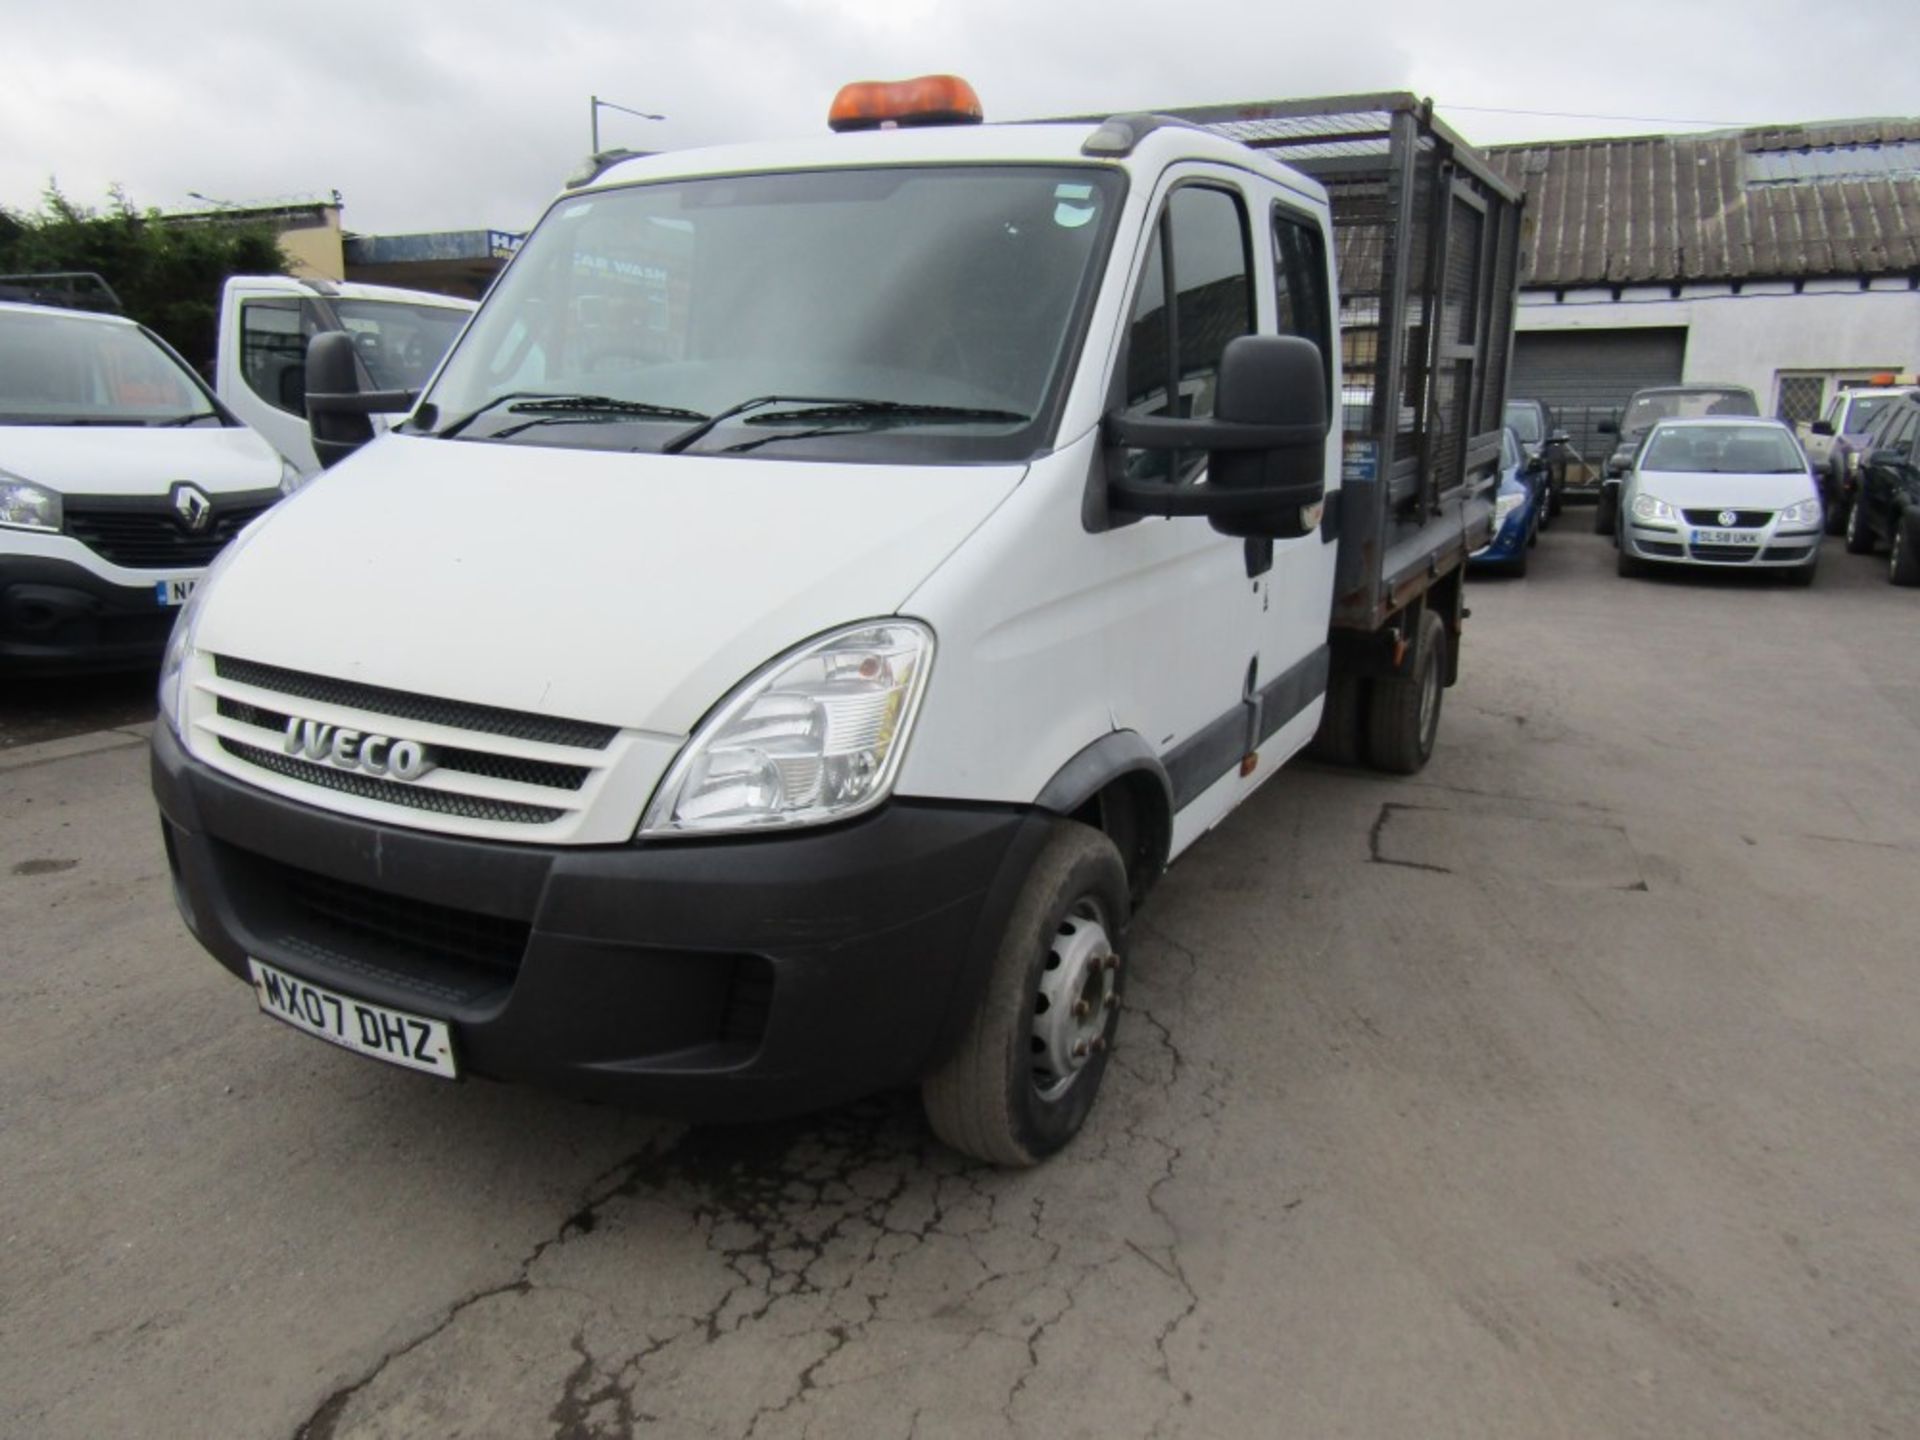 07 reg IVECO 65C18 CREW CAB TIPPER (EX COUNCIL) 1ST REG 03/07, 97900M WARRANTED, V5 HERE, 1 OWNER - Image 2 of 7